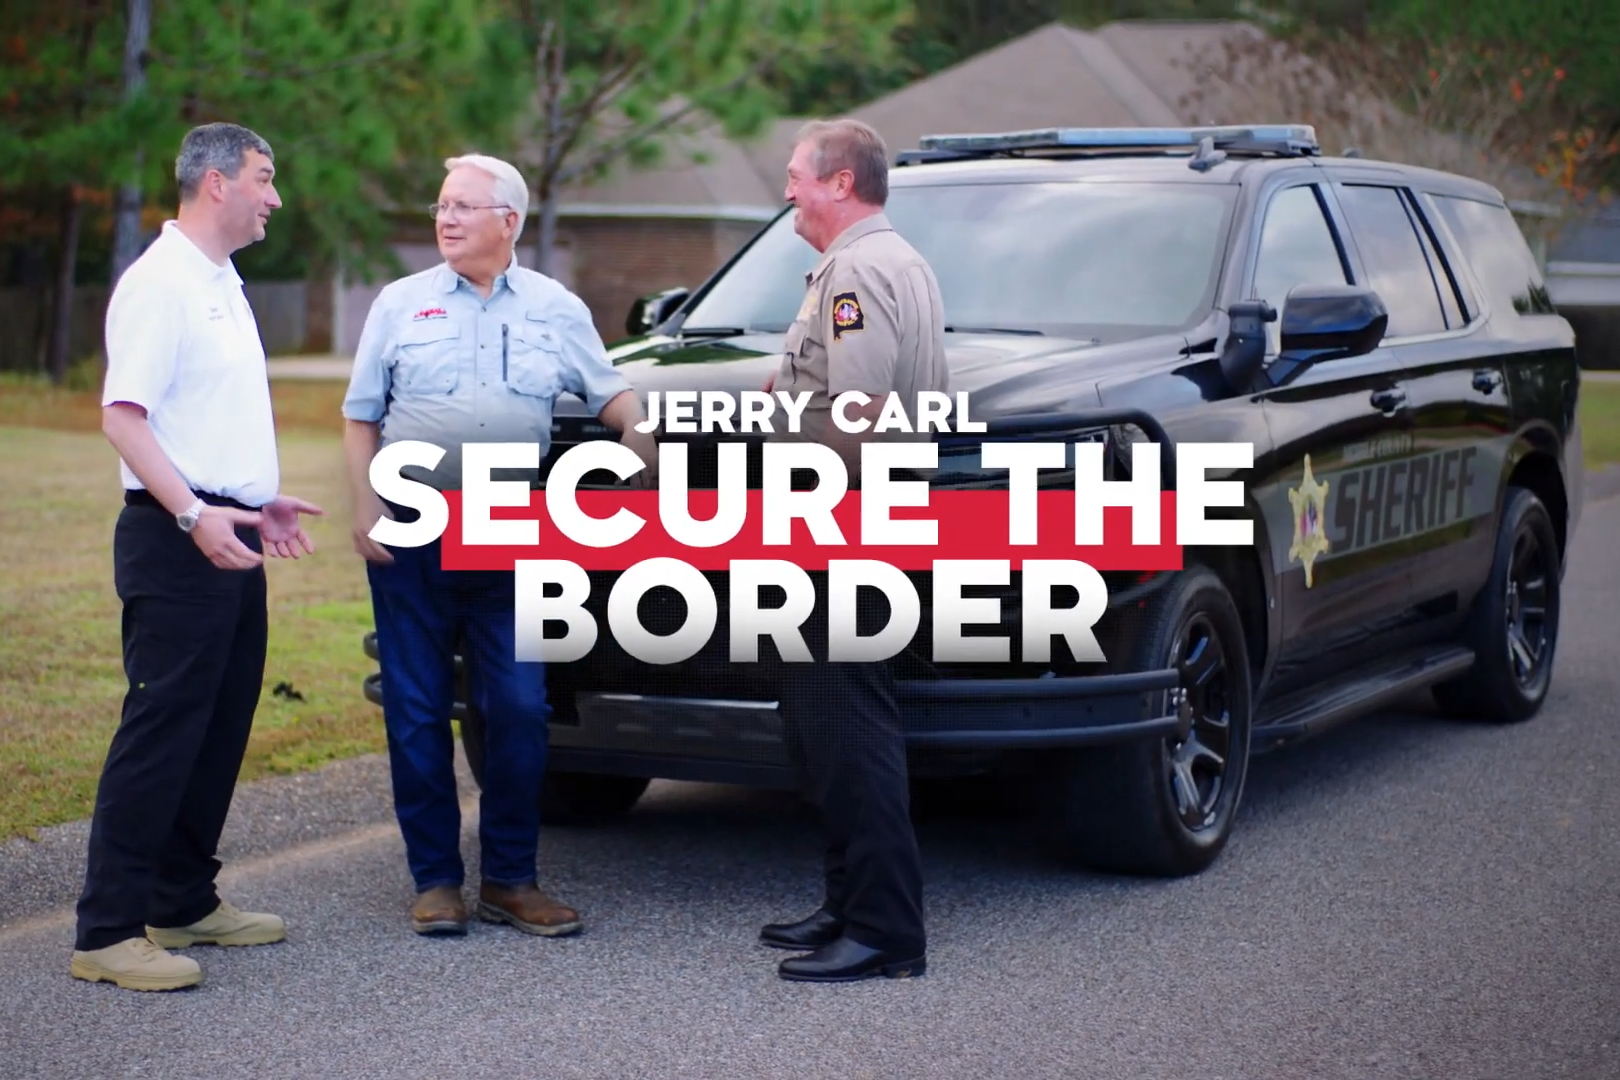 Jerry Carl Secure the Border